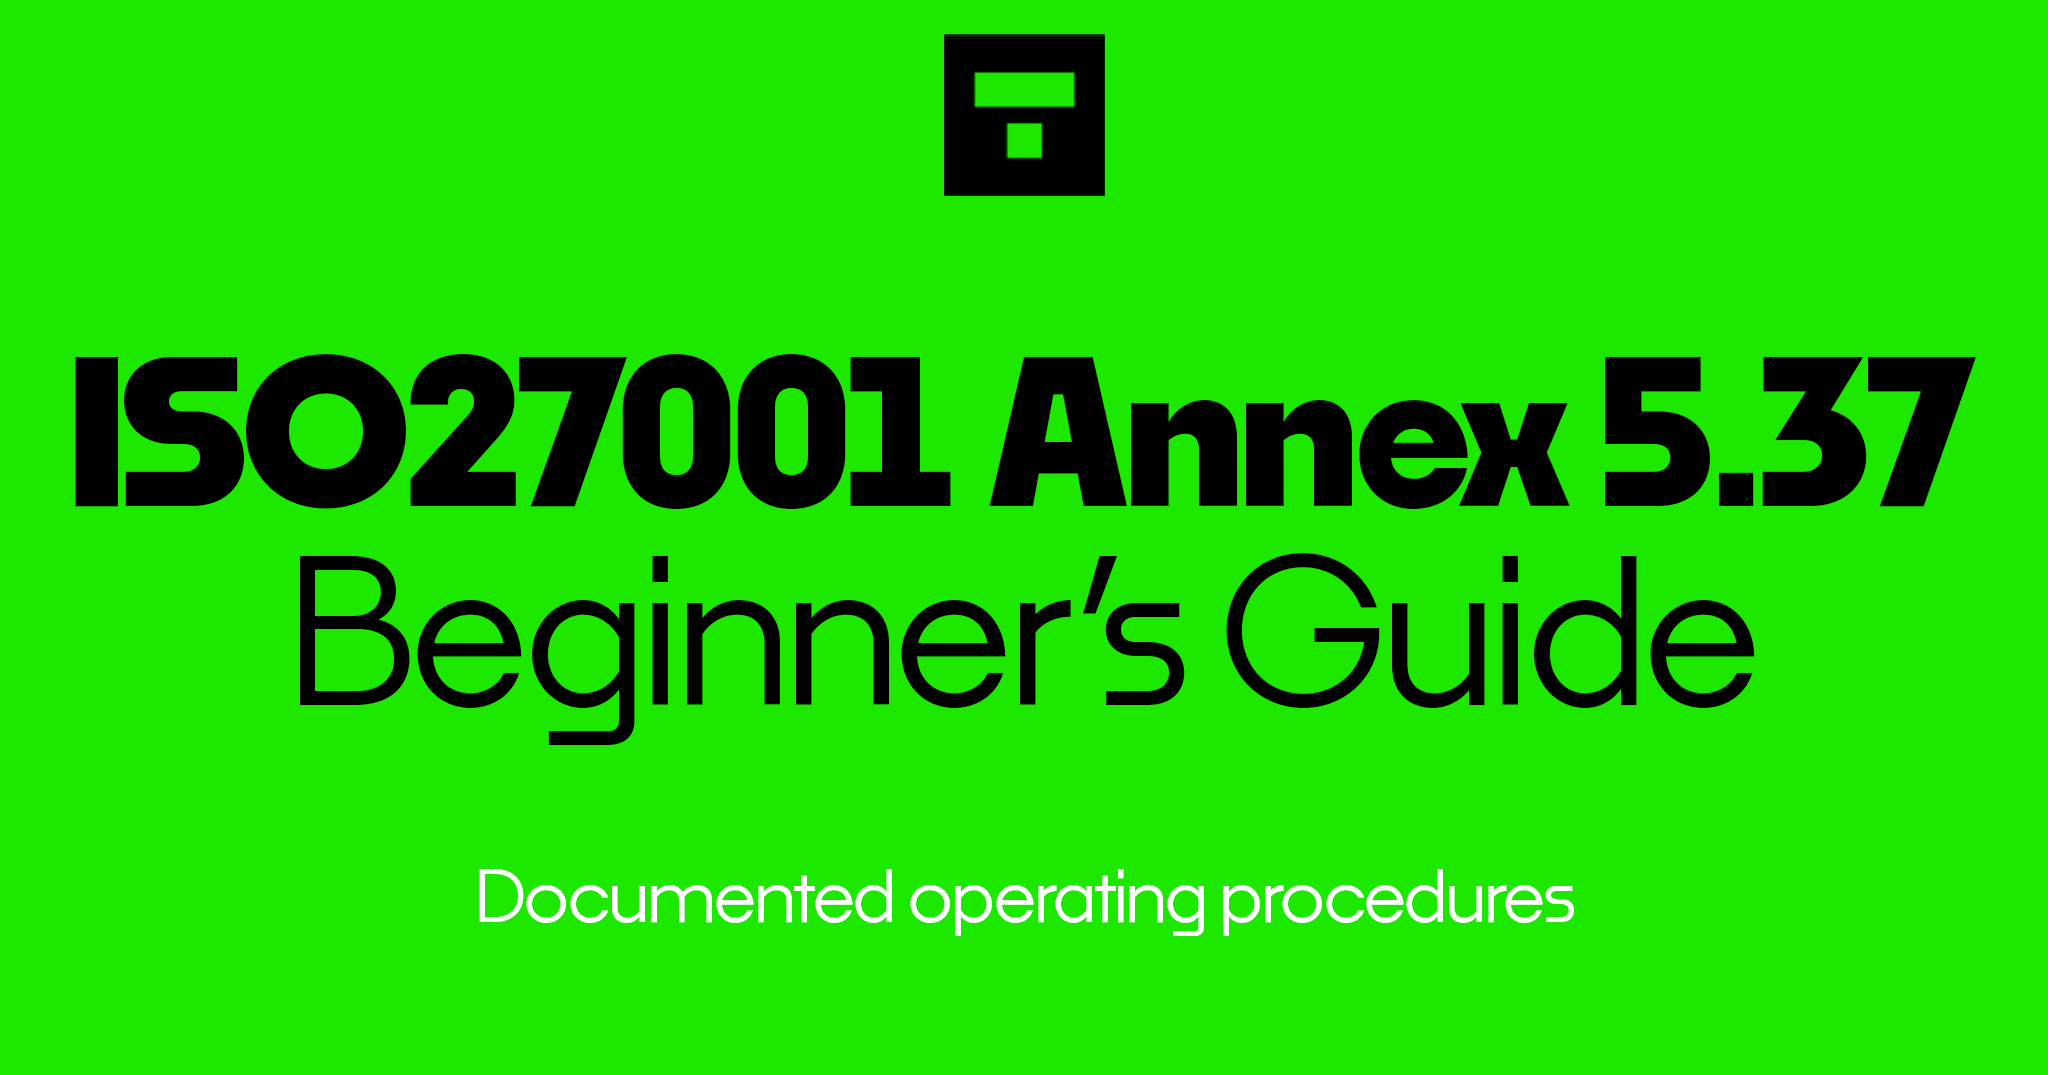 ISO 27001 Annex A 5.37 Documented operating procedures Beginner's Guide